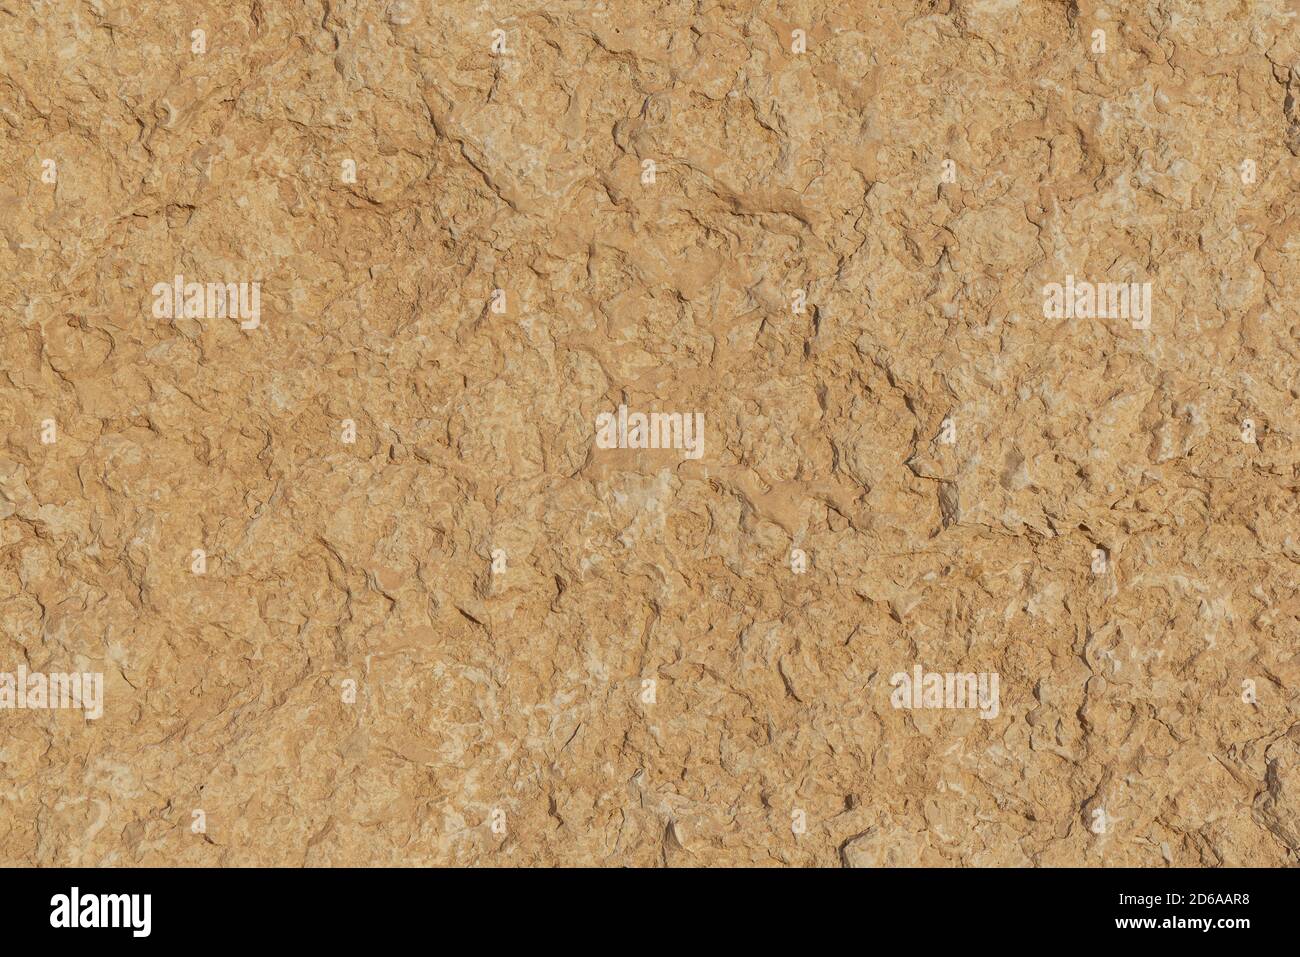 the textured surface of a section of a large sepia colored dolomite boulder from the makthesh ramon crater in israel Stock Photo